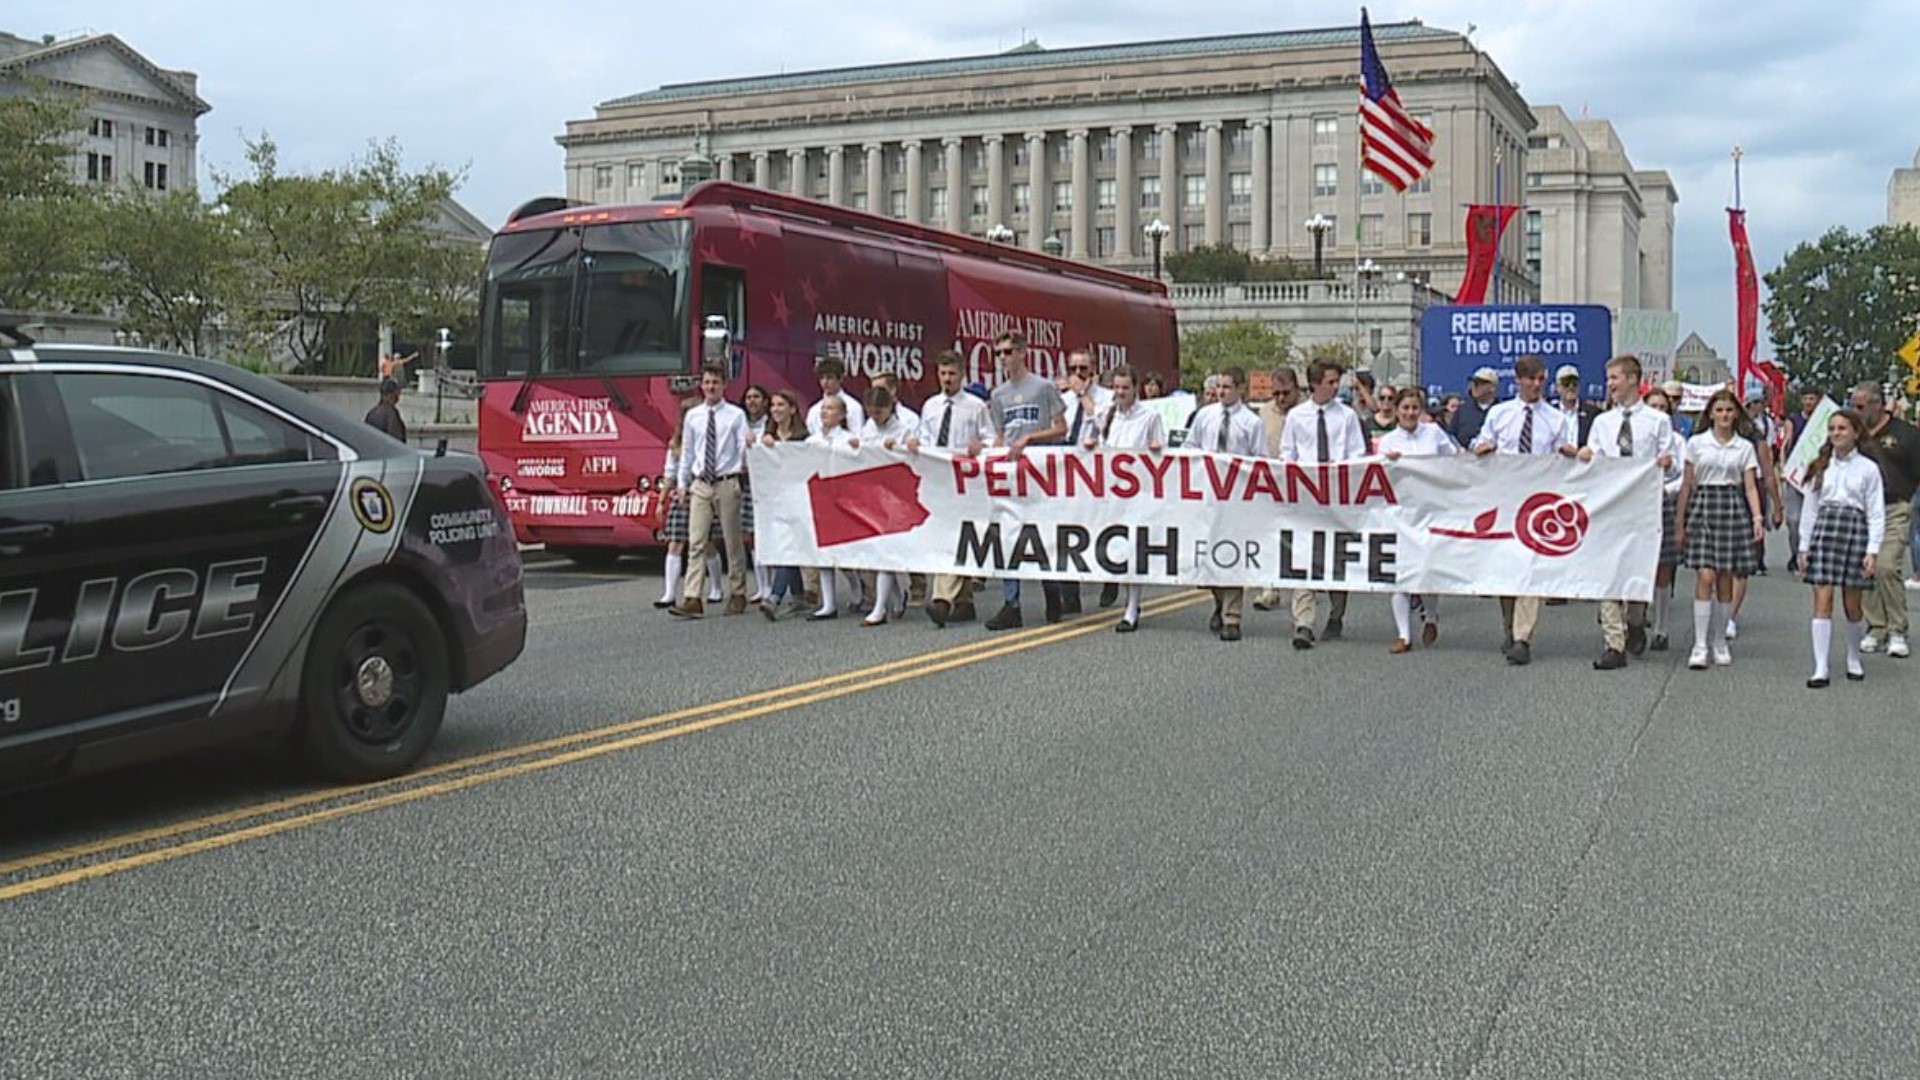 Pro-life advocates attended "March for Life" in Harrisburg today, while lawmakers introduced new legislation to expand and protect abortion rights in Pennsylvania.